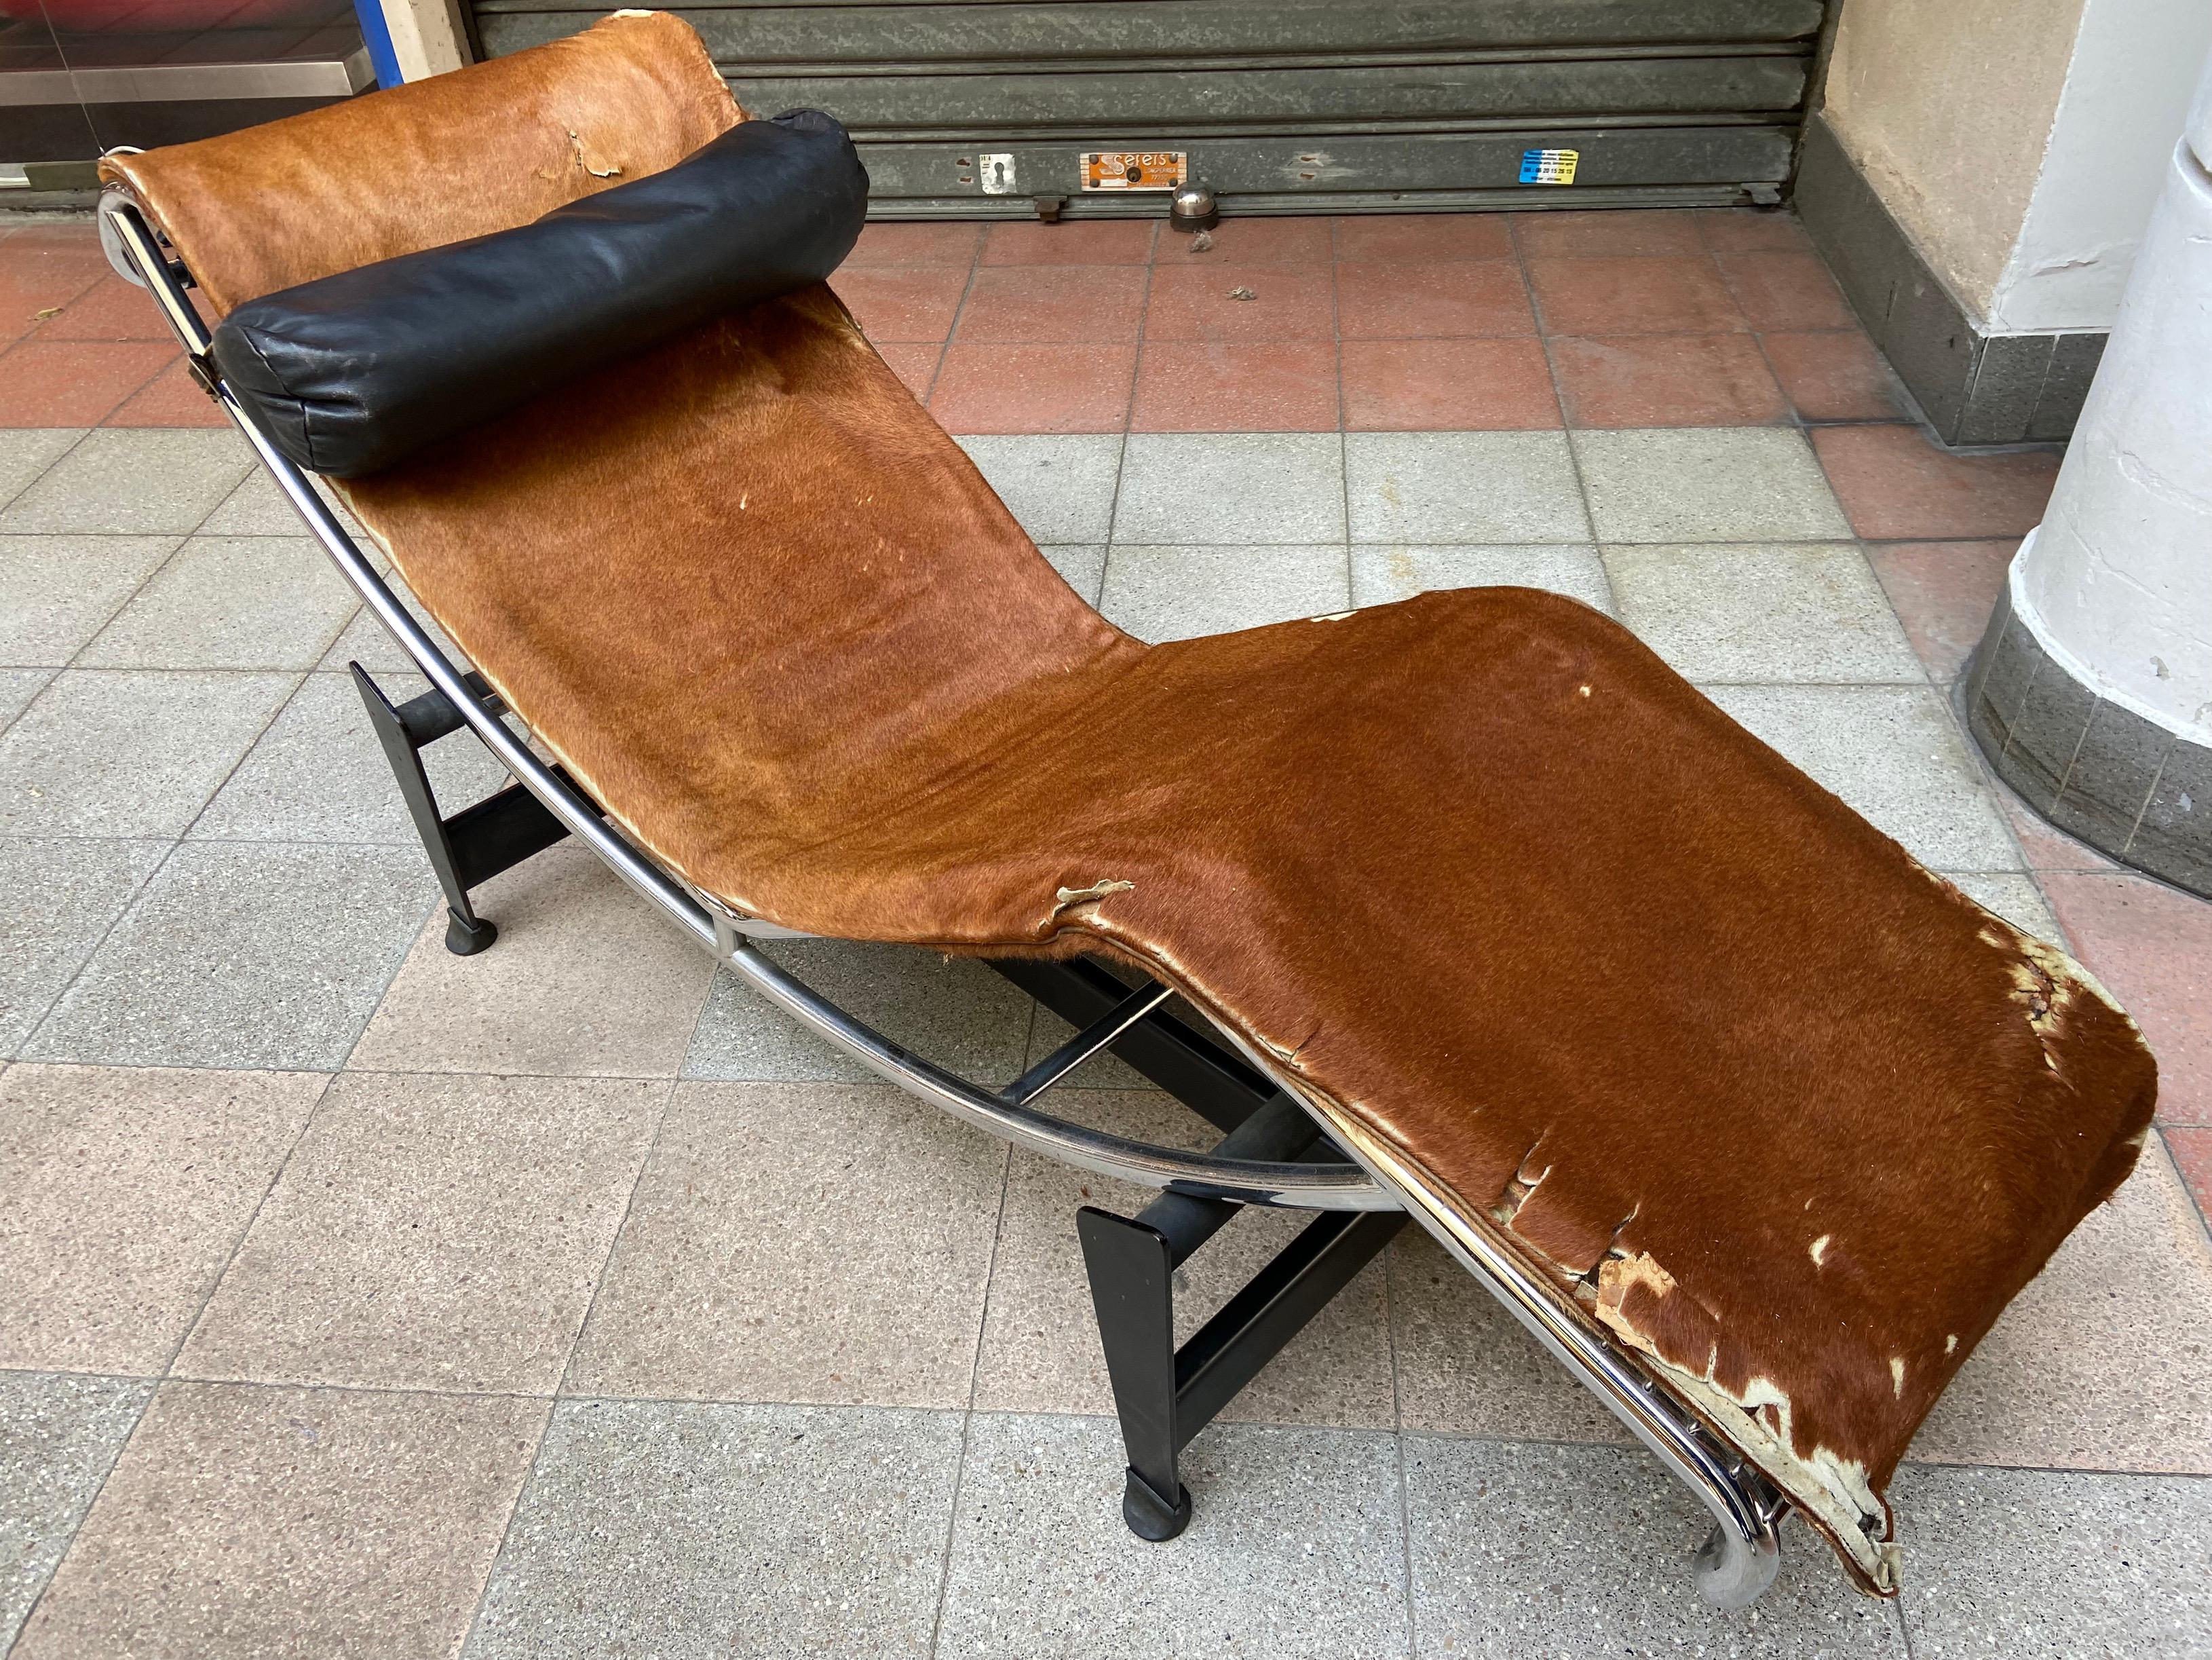 Rare LC4 original beige cowhide and original grained leather - Le Corbusier
Original foot and frame

1966

Signature and number 827 engraved on the frame

Measures: D 157 cm W 55 cm H 71 cm.